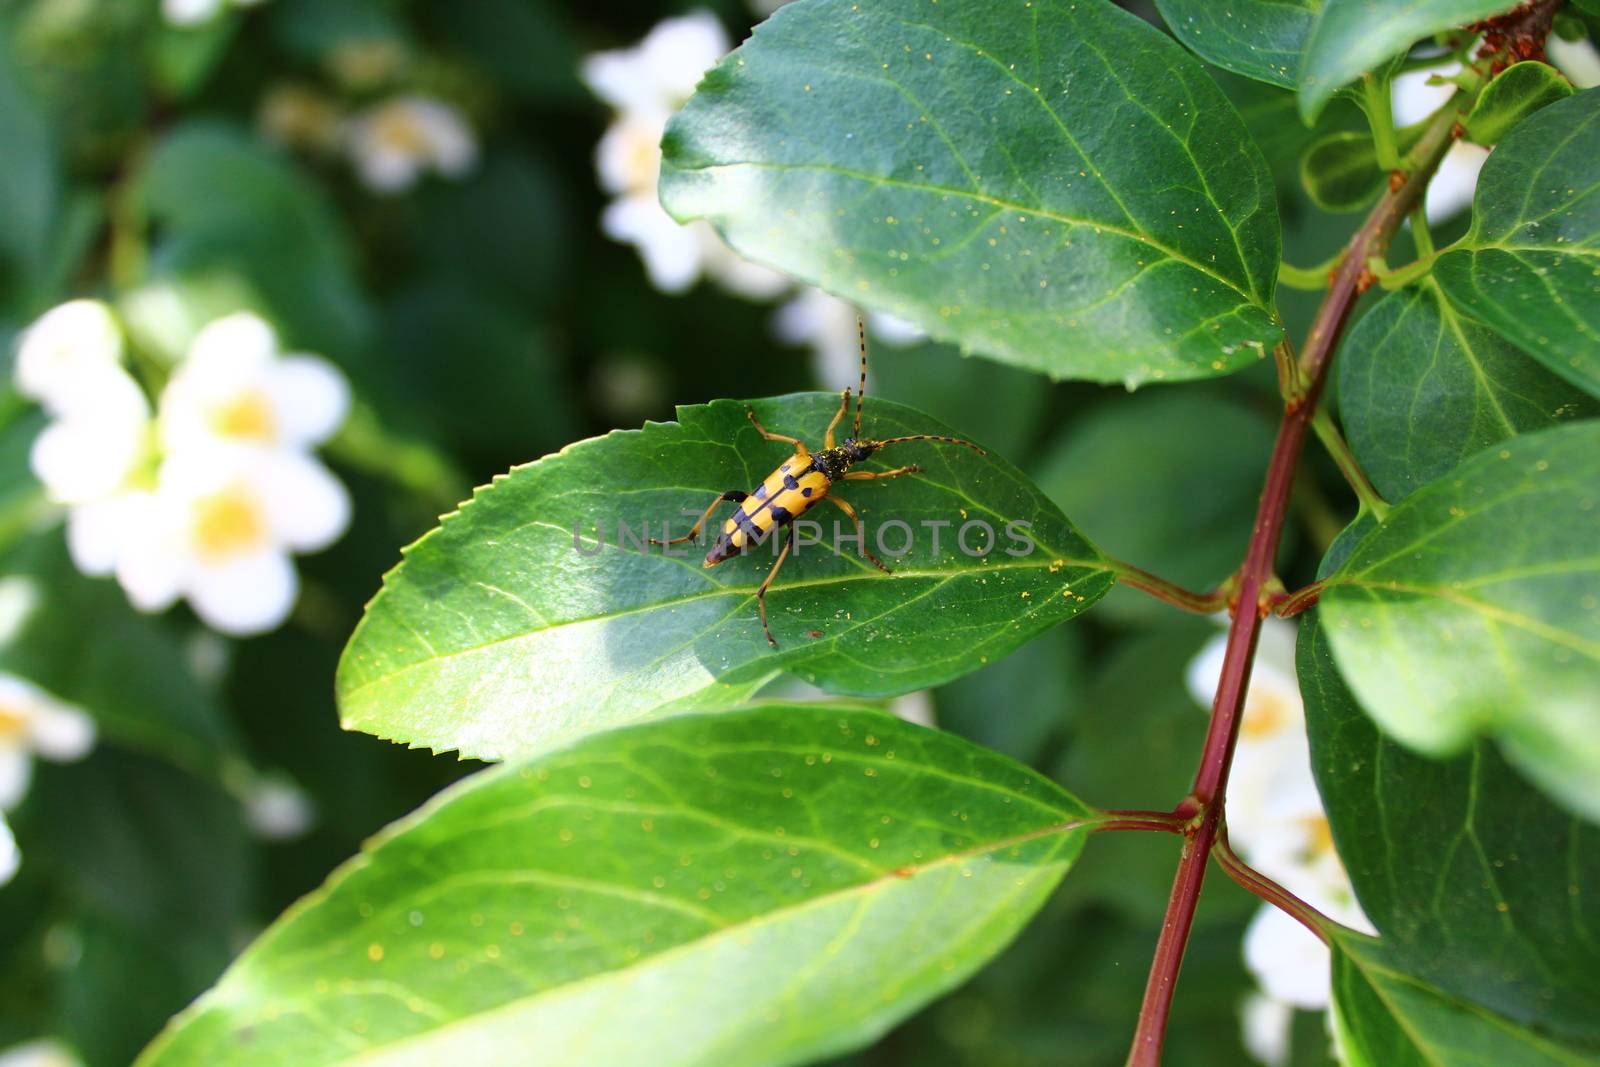 The picture shows a black and yellow longhorn beetle in the jasmine.